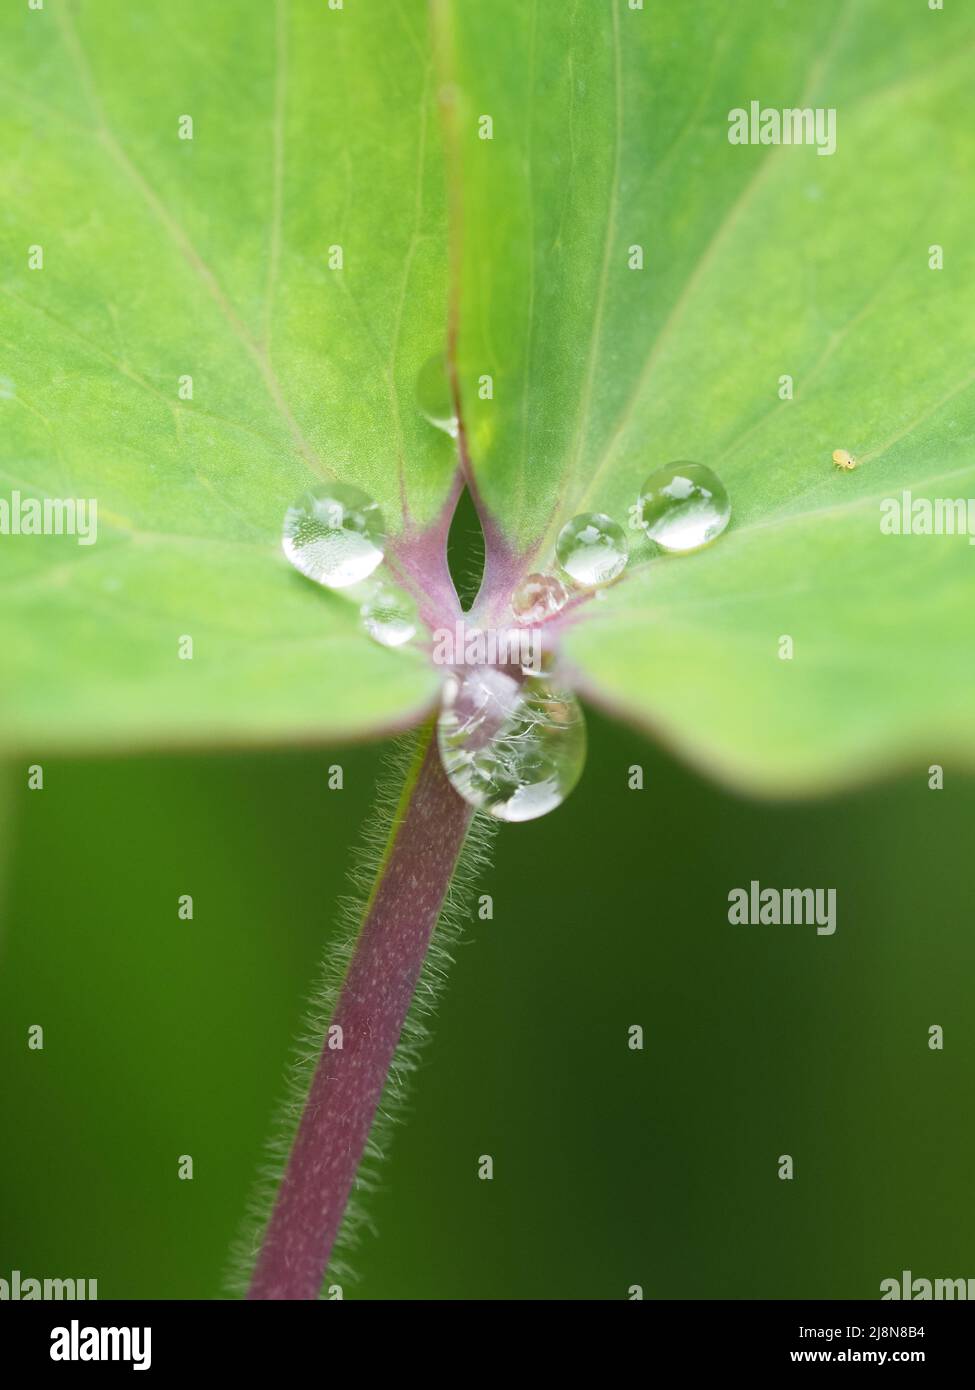 Close up of water drops on a green leaf with a red stem. Hairs on the stem & a small yellow insect on the right of picture. Shallow depth of focus. Stock Photo